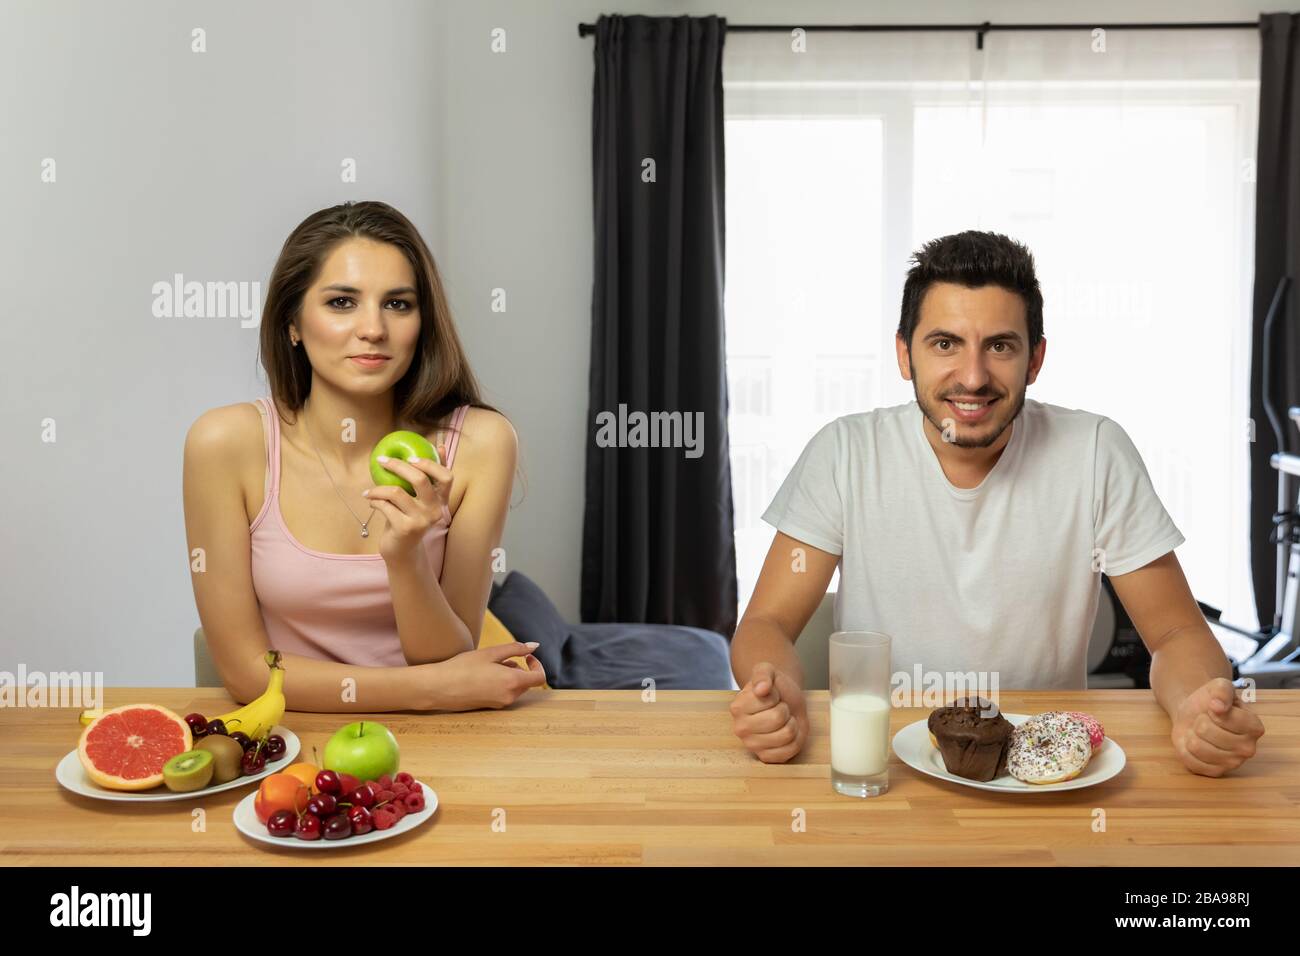 A man leads a wrong lifestyle, he eats donuts with icing for breakfast. The girl prefers fresh fruits and berries, she is a vegan. The confrontation o Stock Photo